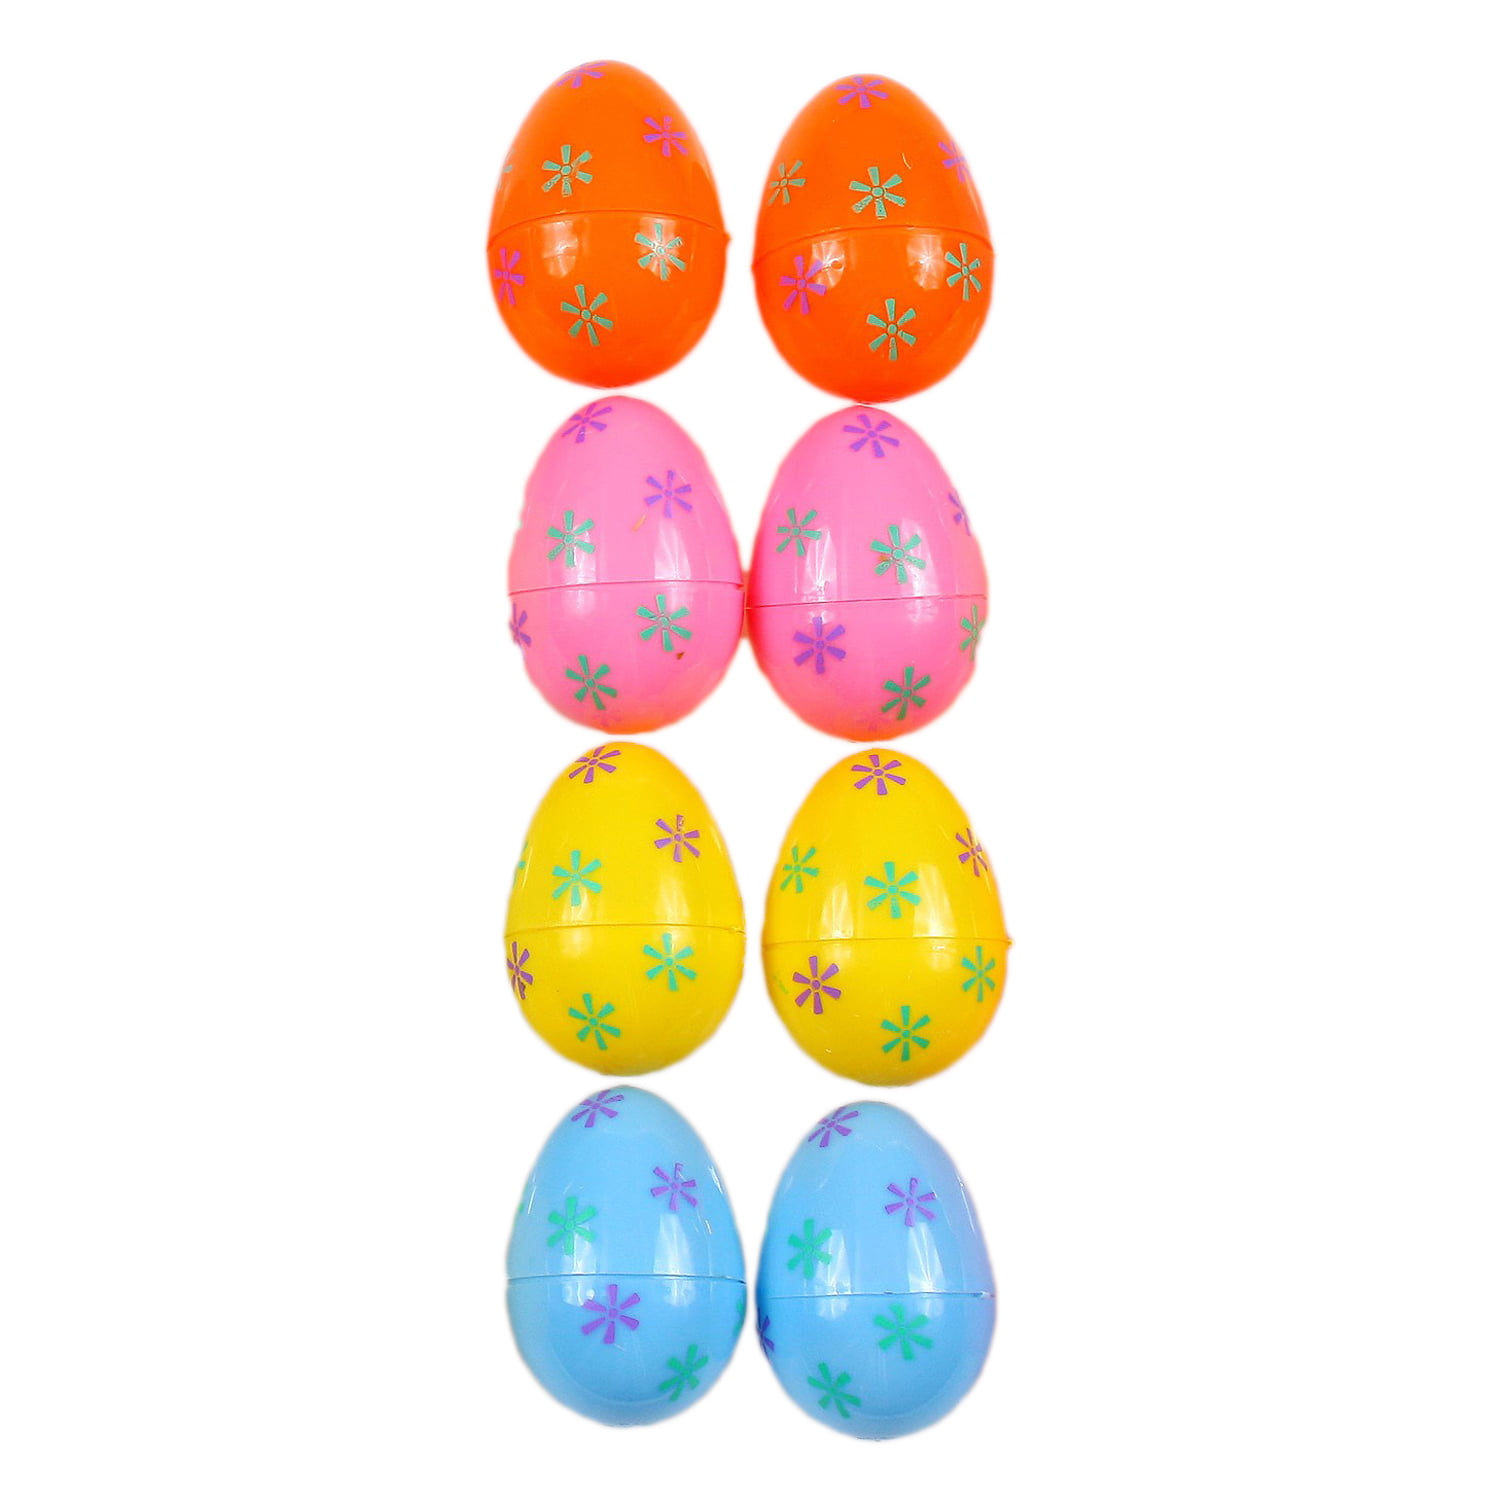 Style 3 2.5 inches Multicolored Athoinsu 24 PCS Easter Eggs Set Colorful Expression Painted Fillable Eggs Party Favors Spring Home Yard Decor Gifts